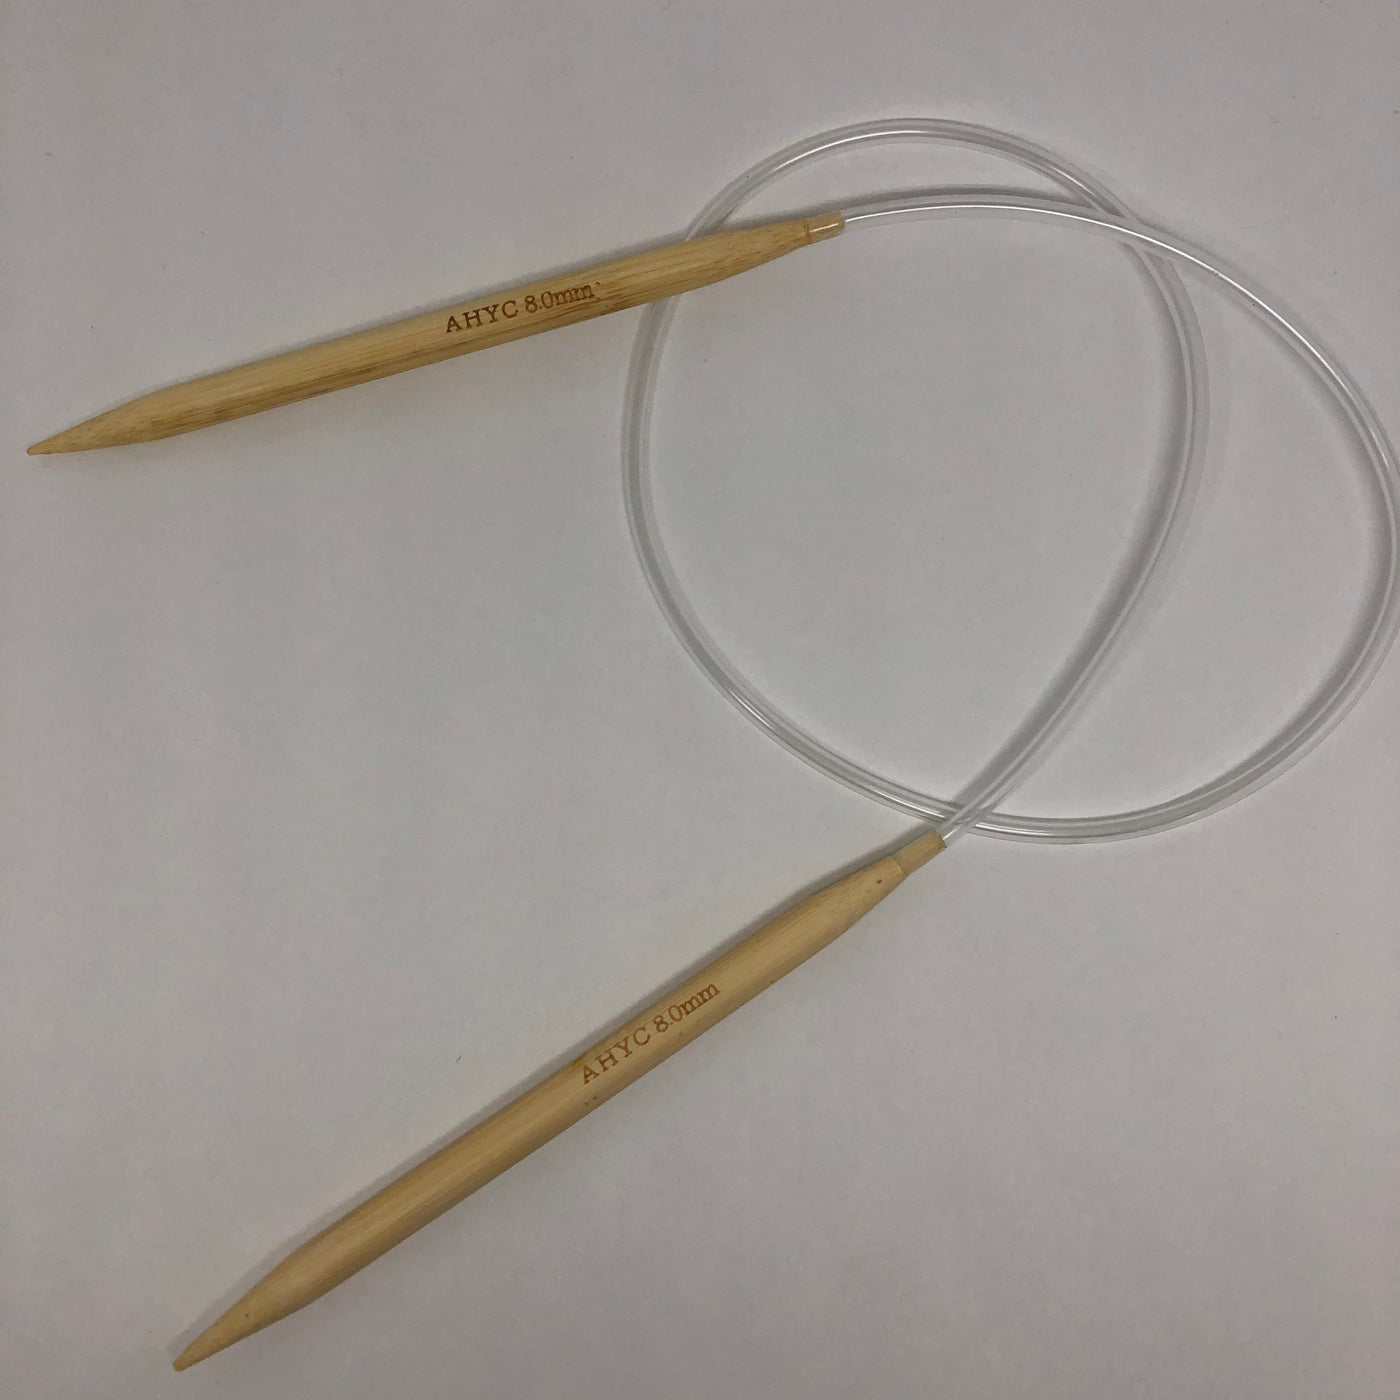 Where can I find bamboo circular knitting needles 8mm